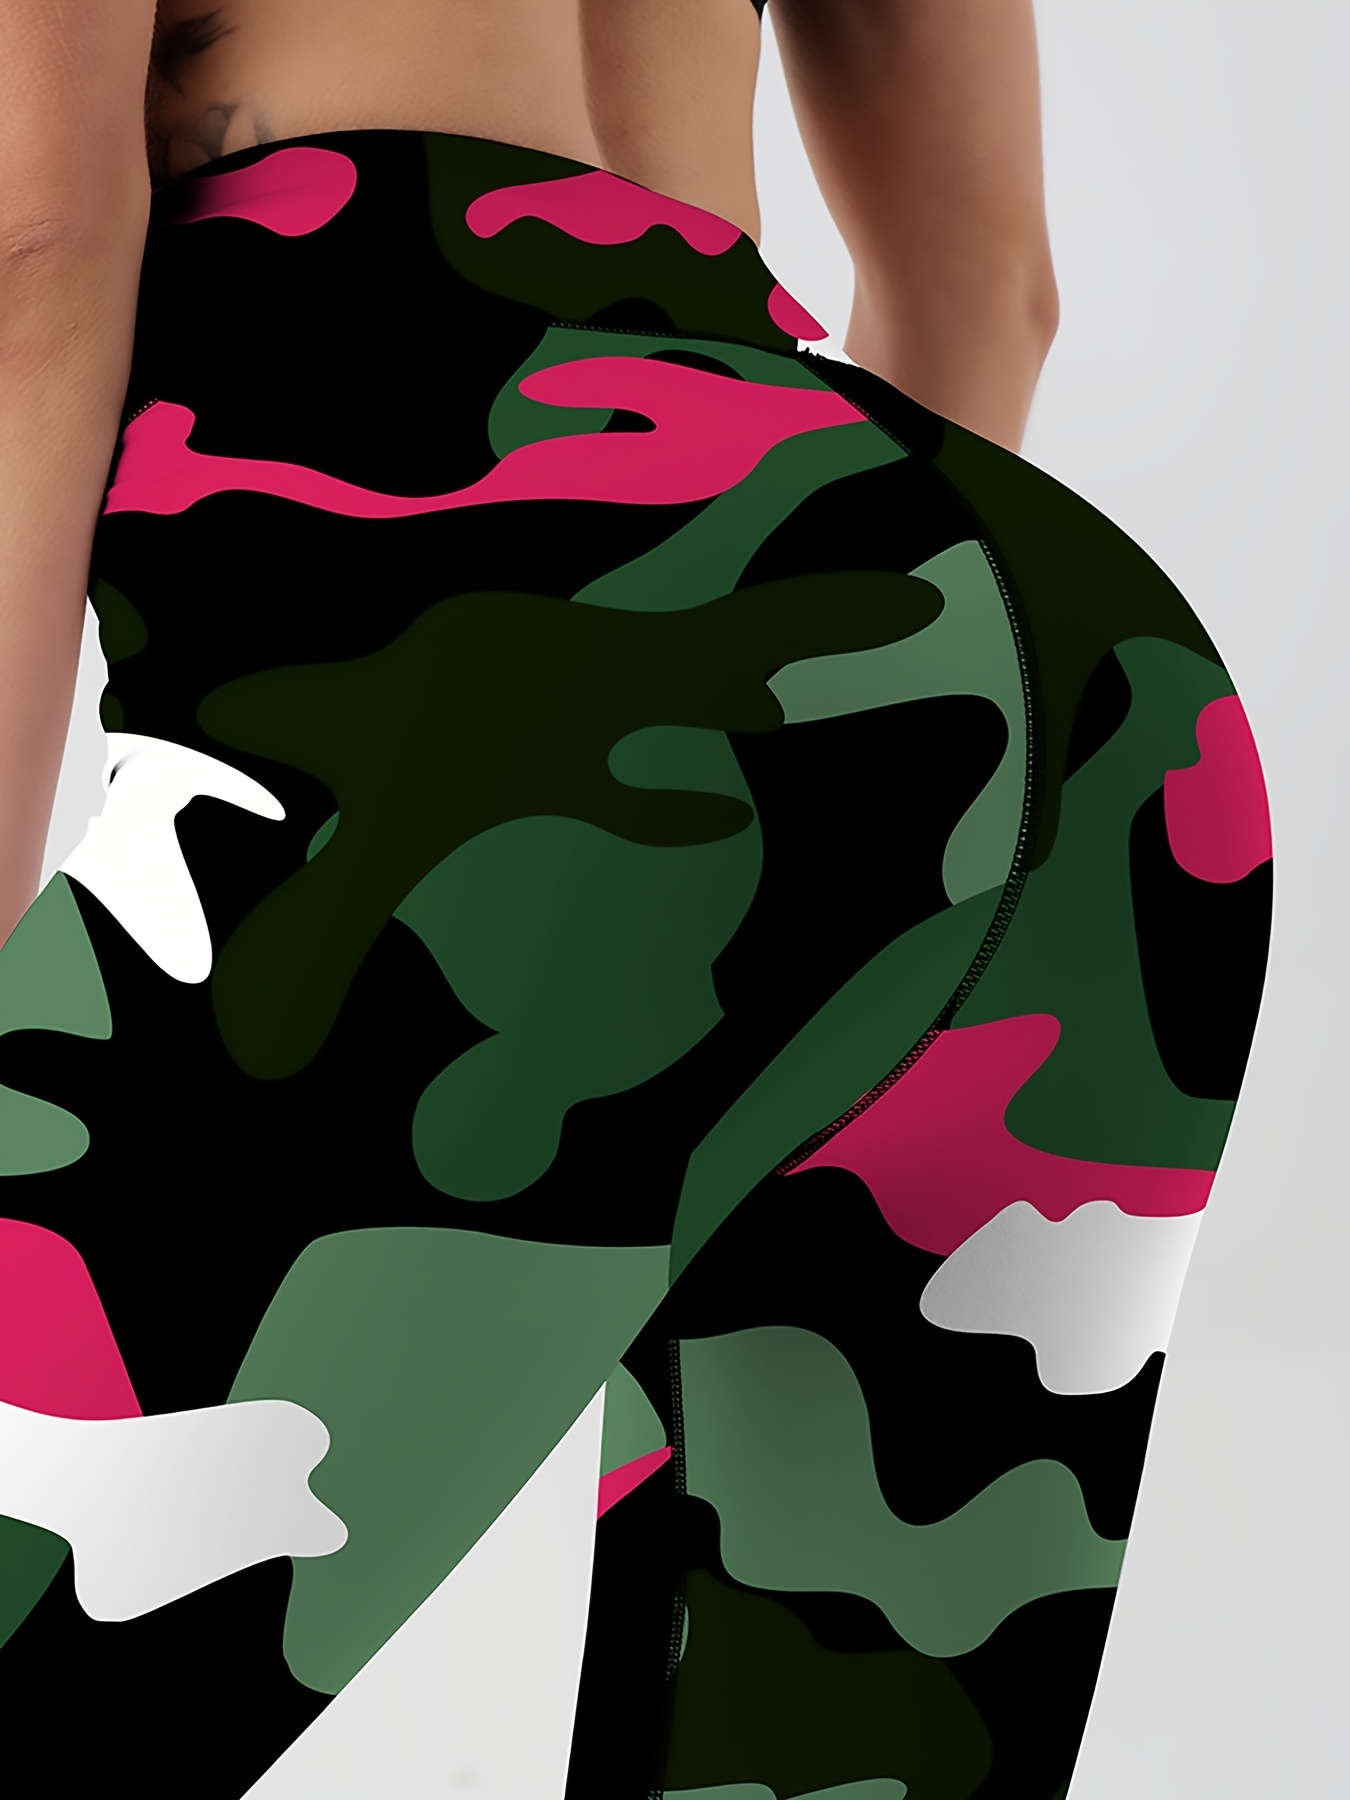 Womens Camo Fitness Workout Yoga Exercise Leggings Pink, Blue, Black, Green